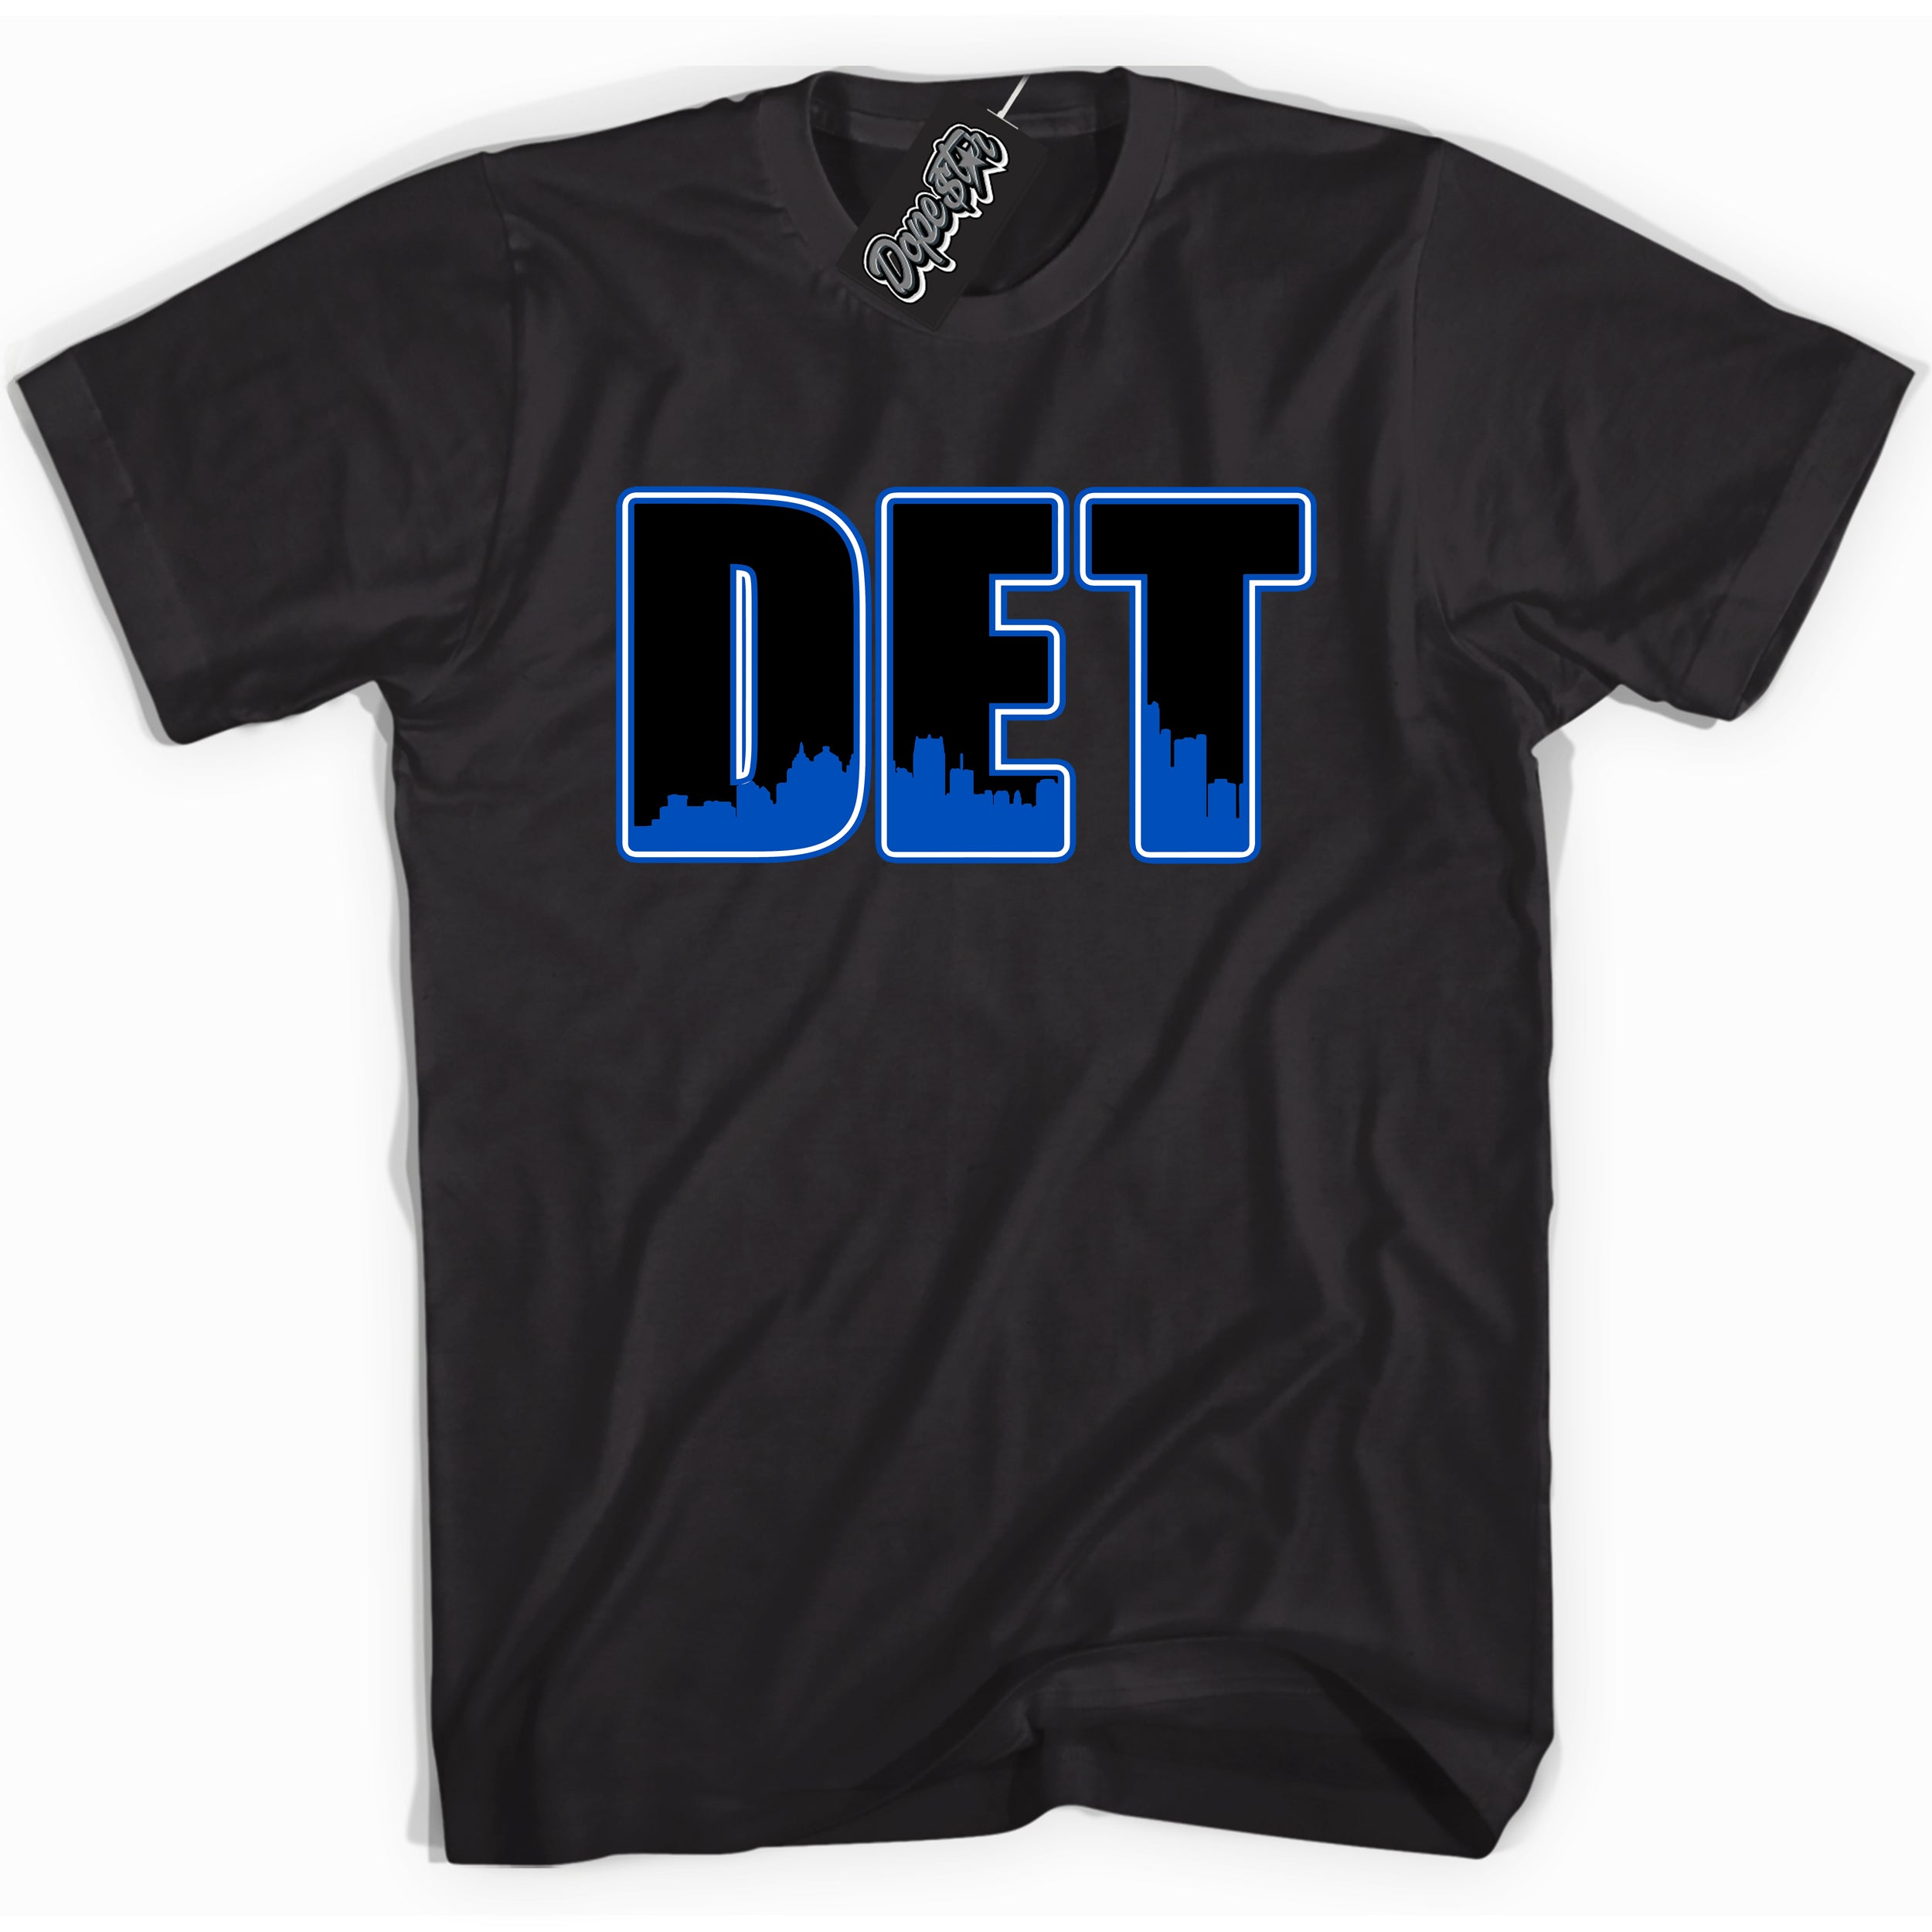 Cool Black graphic tee with "Detroit" design, that perfectly matches Royal Reimagined 1s sneakers 